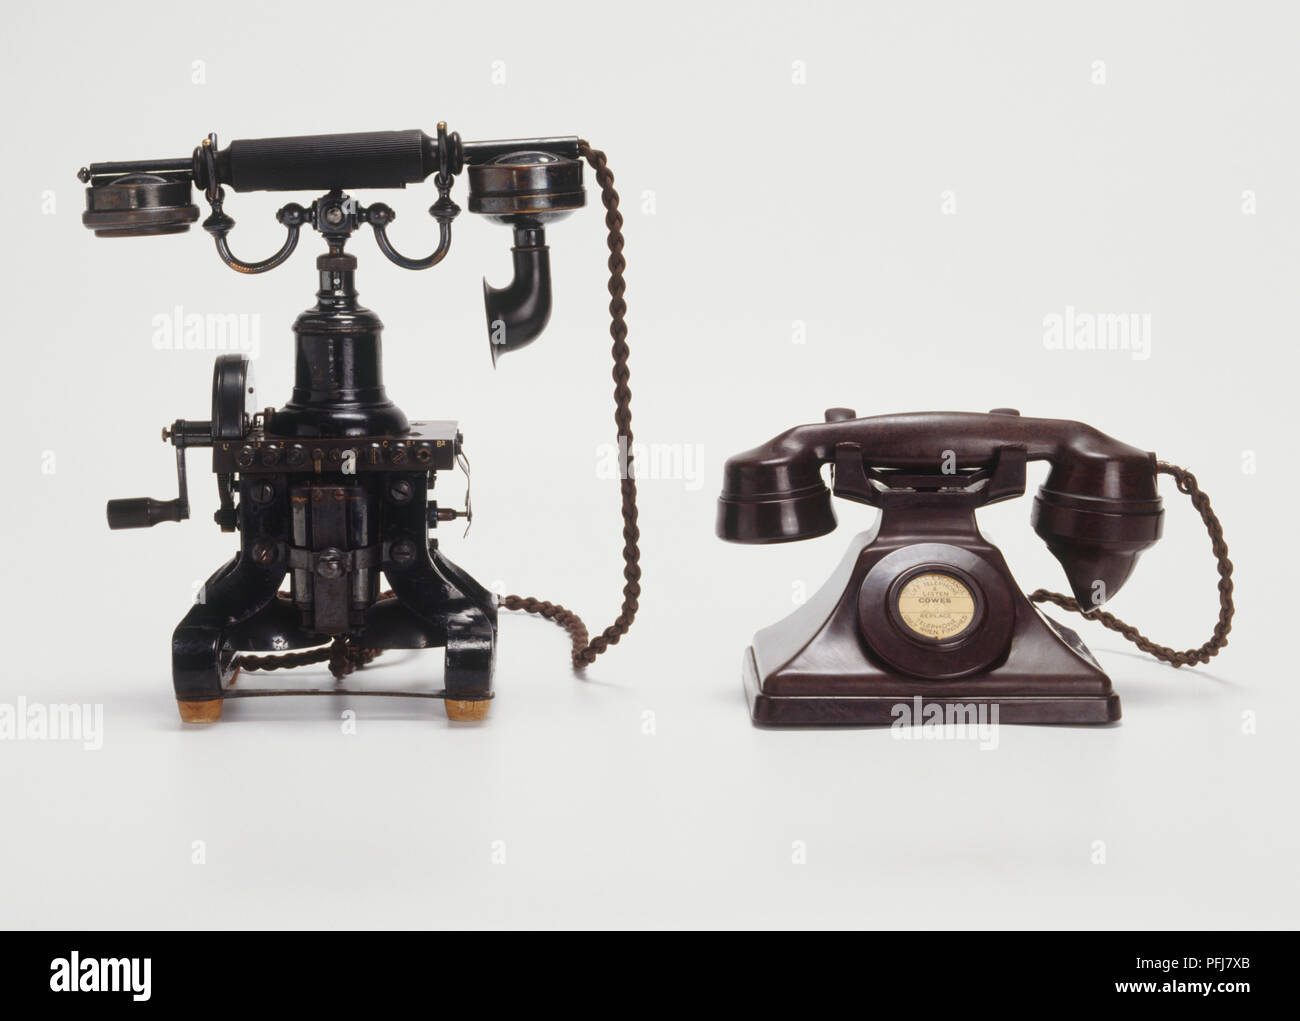 Two old, black desk phones, large mouthpieces, receiver across top, one with side crank Stock Photo